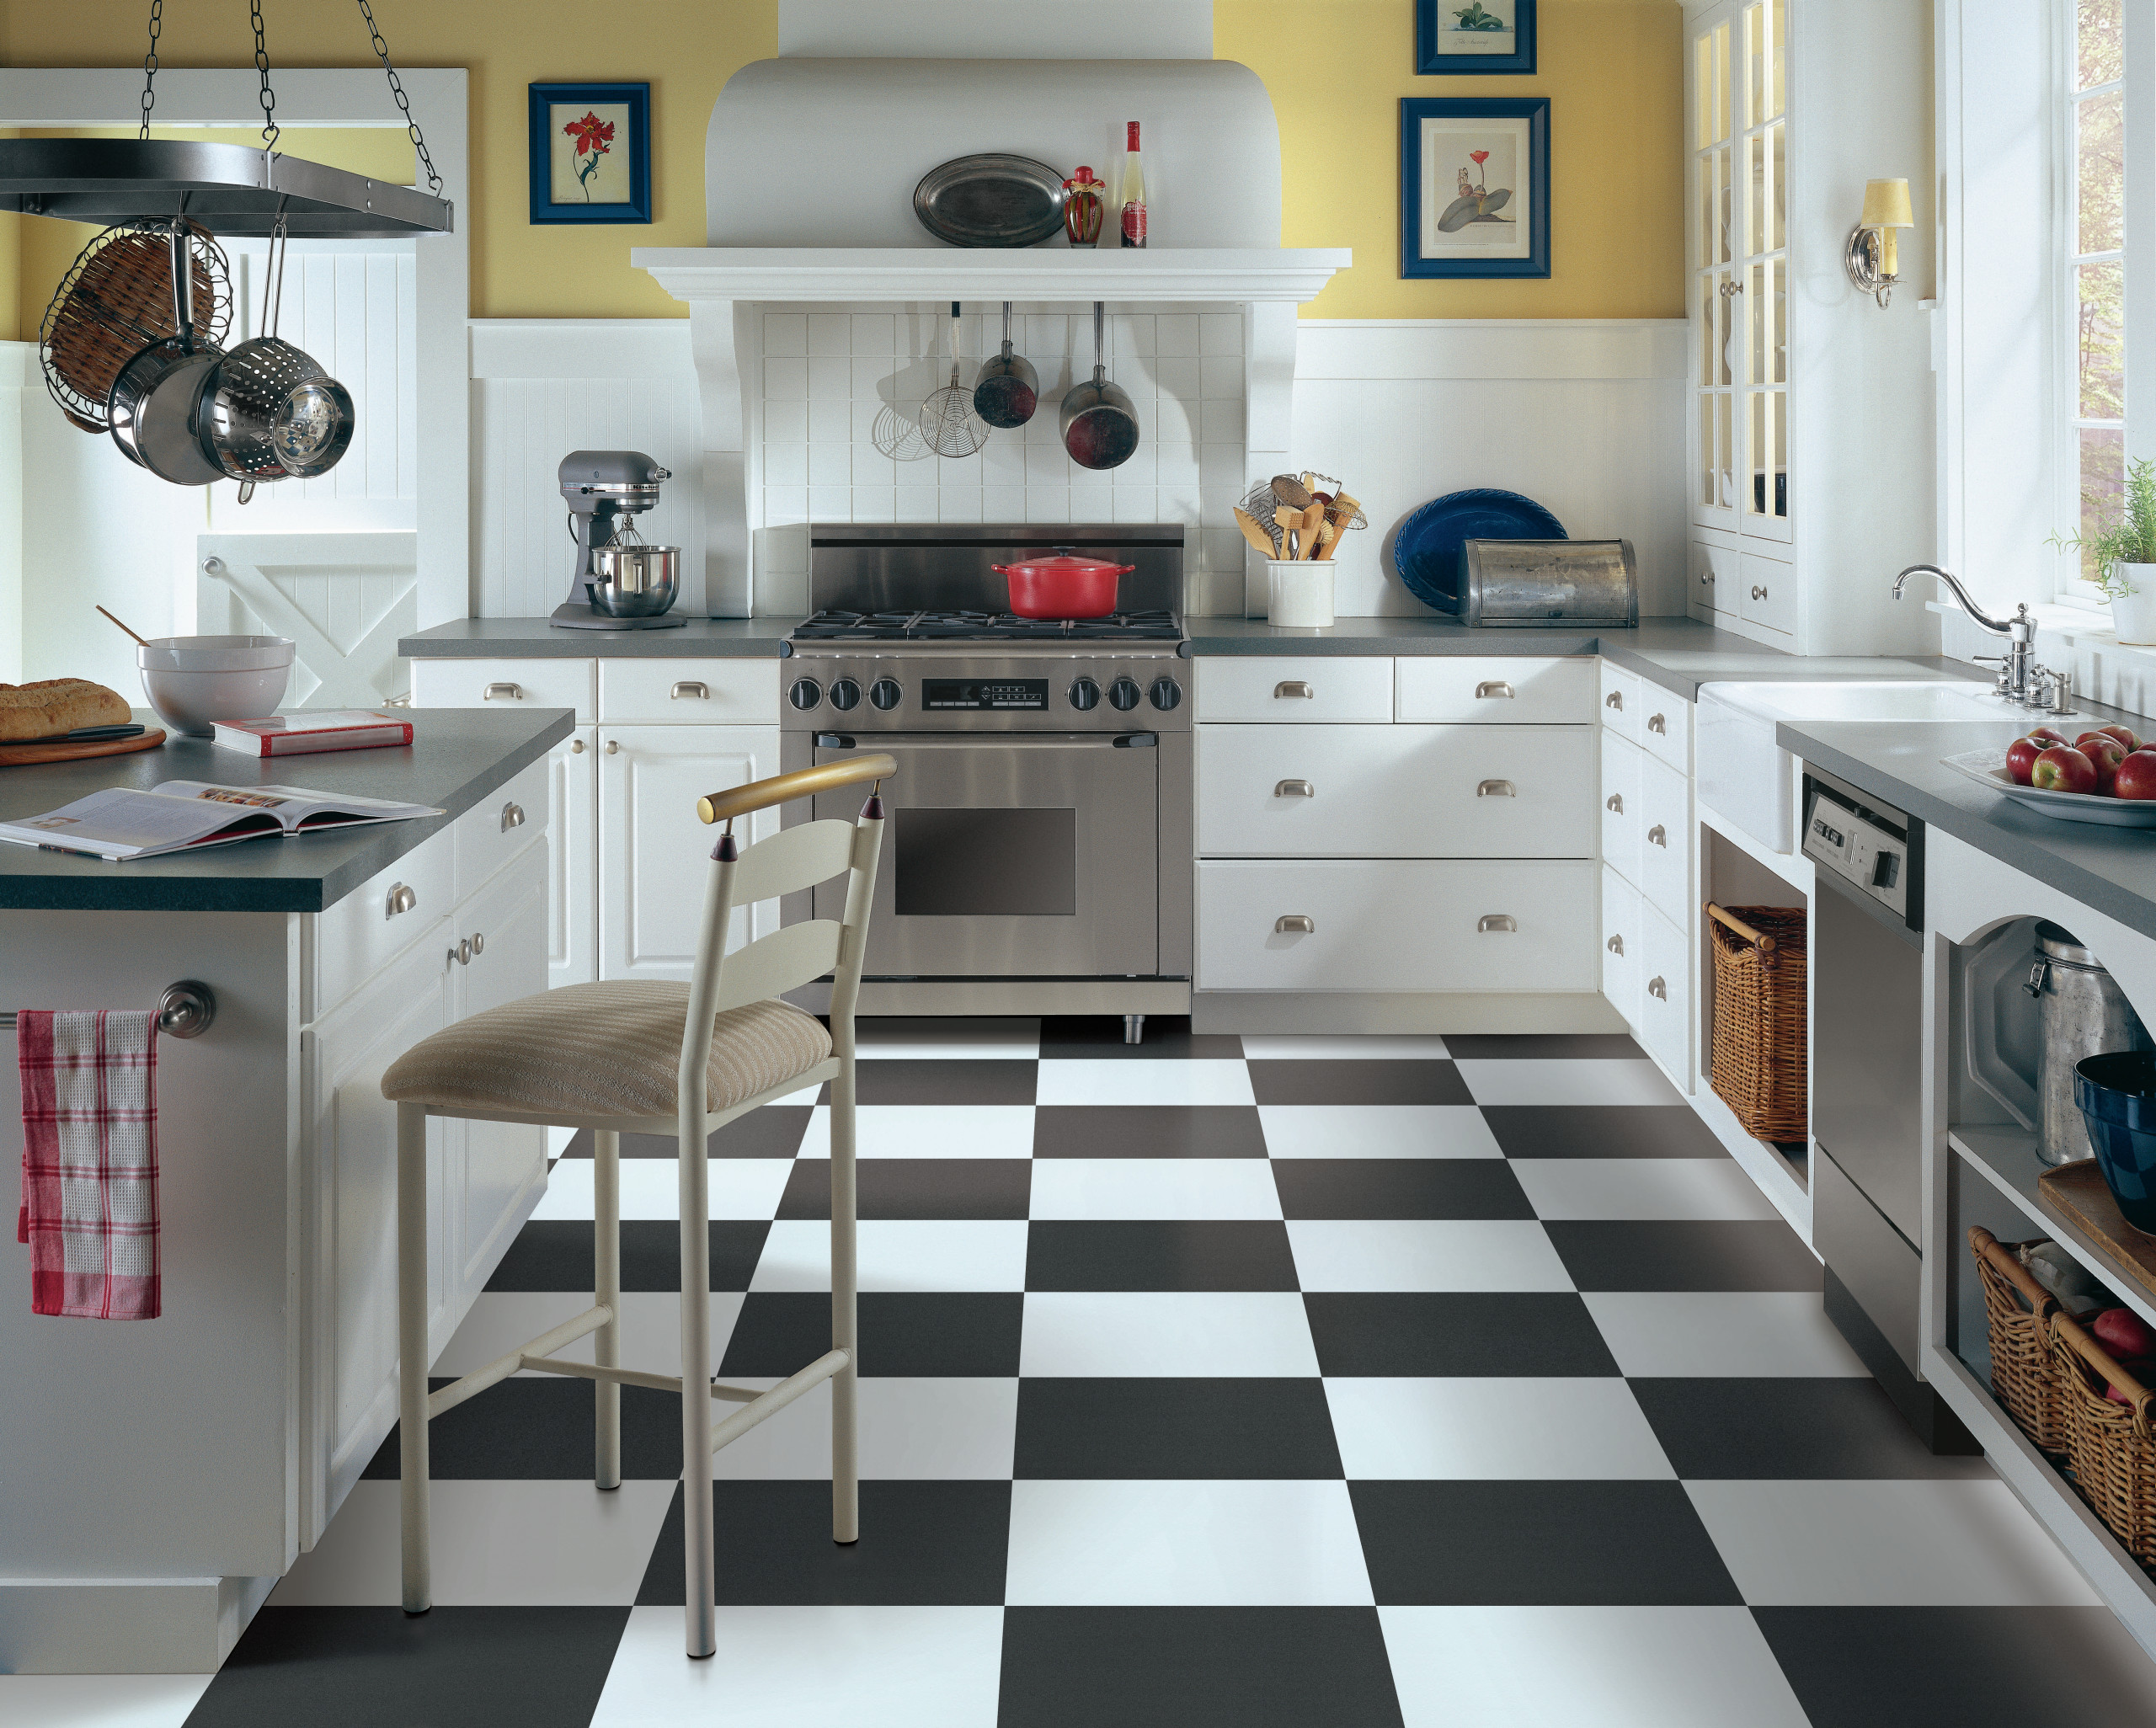 Work It: Classic Black & White Checkered Kitchen Floors Looking